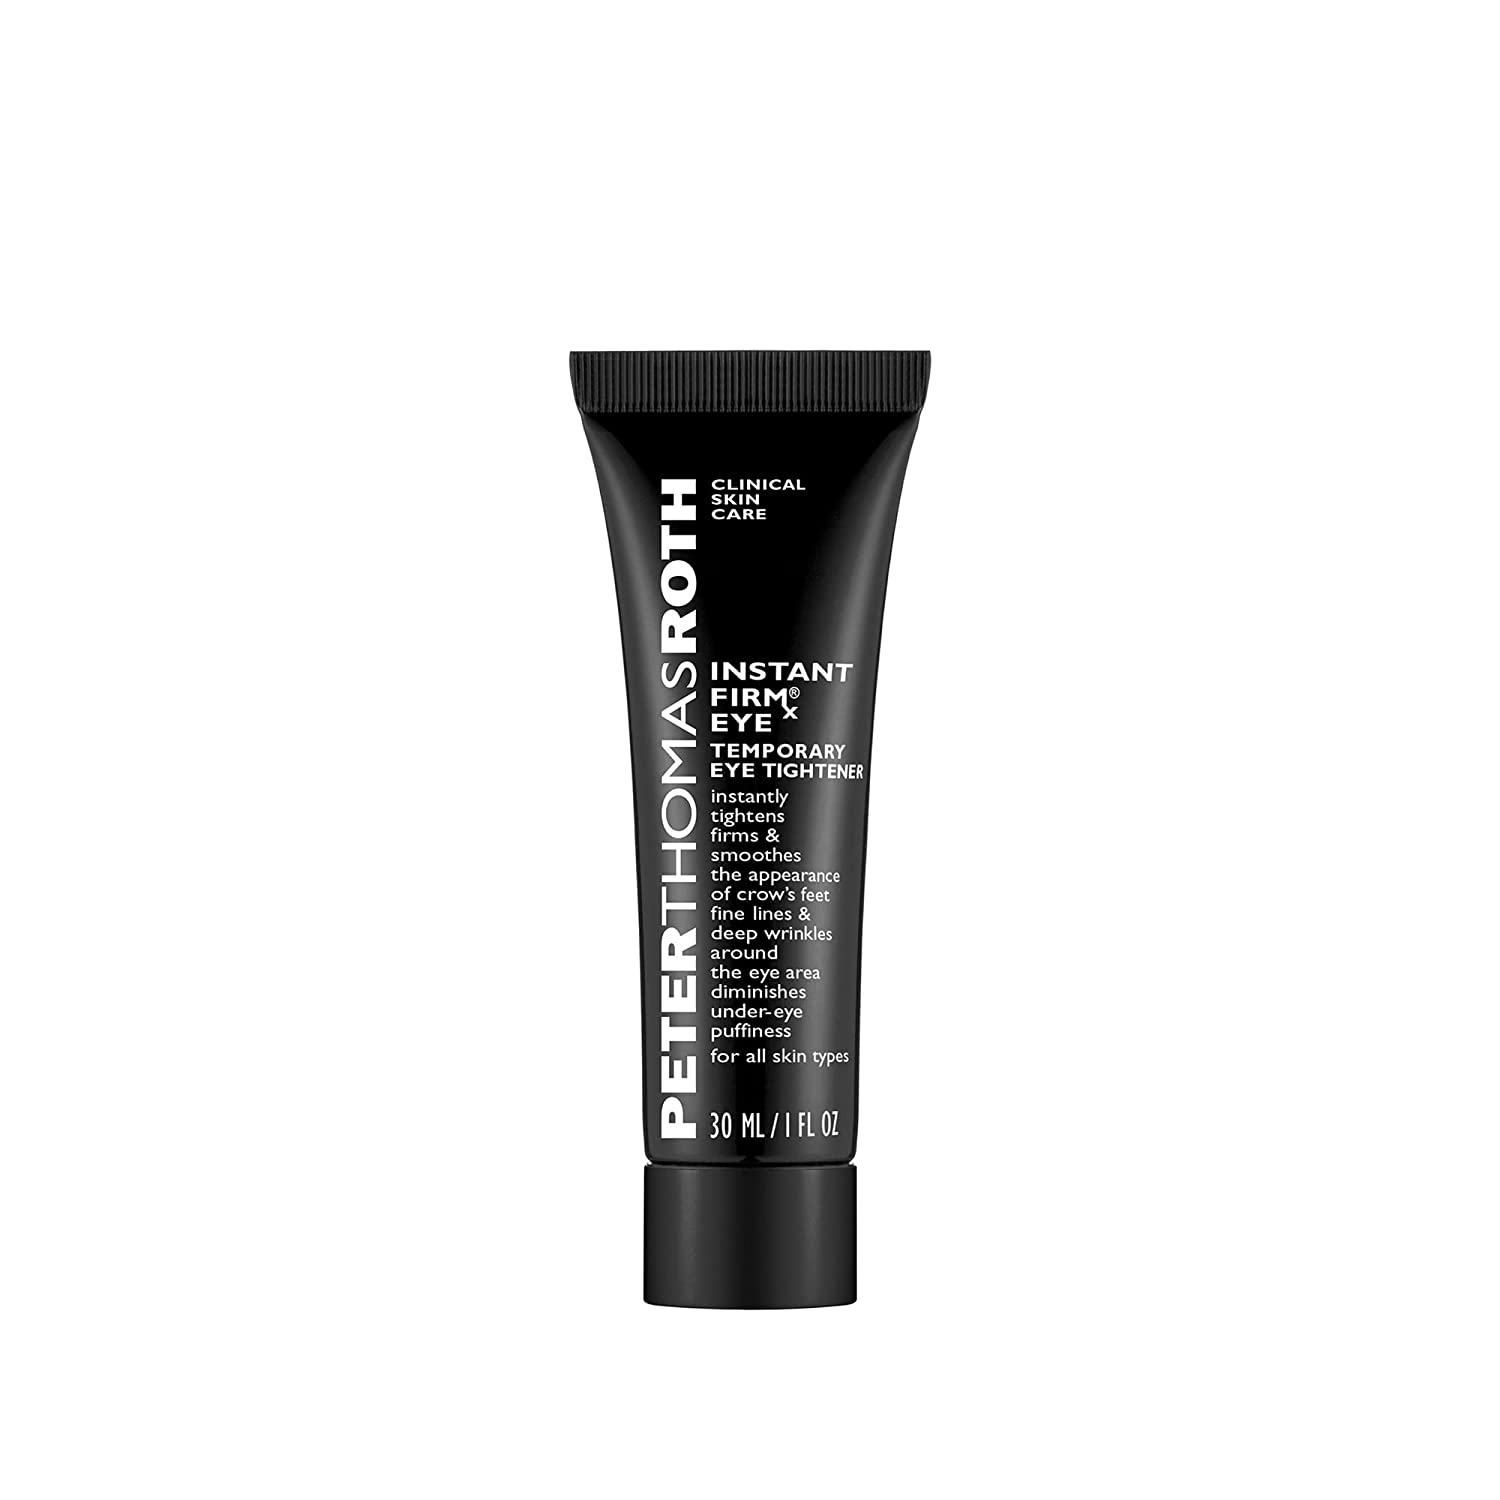 Peter Thomas Roth Instant Firm eye - 30 ml-2